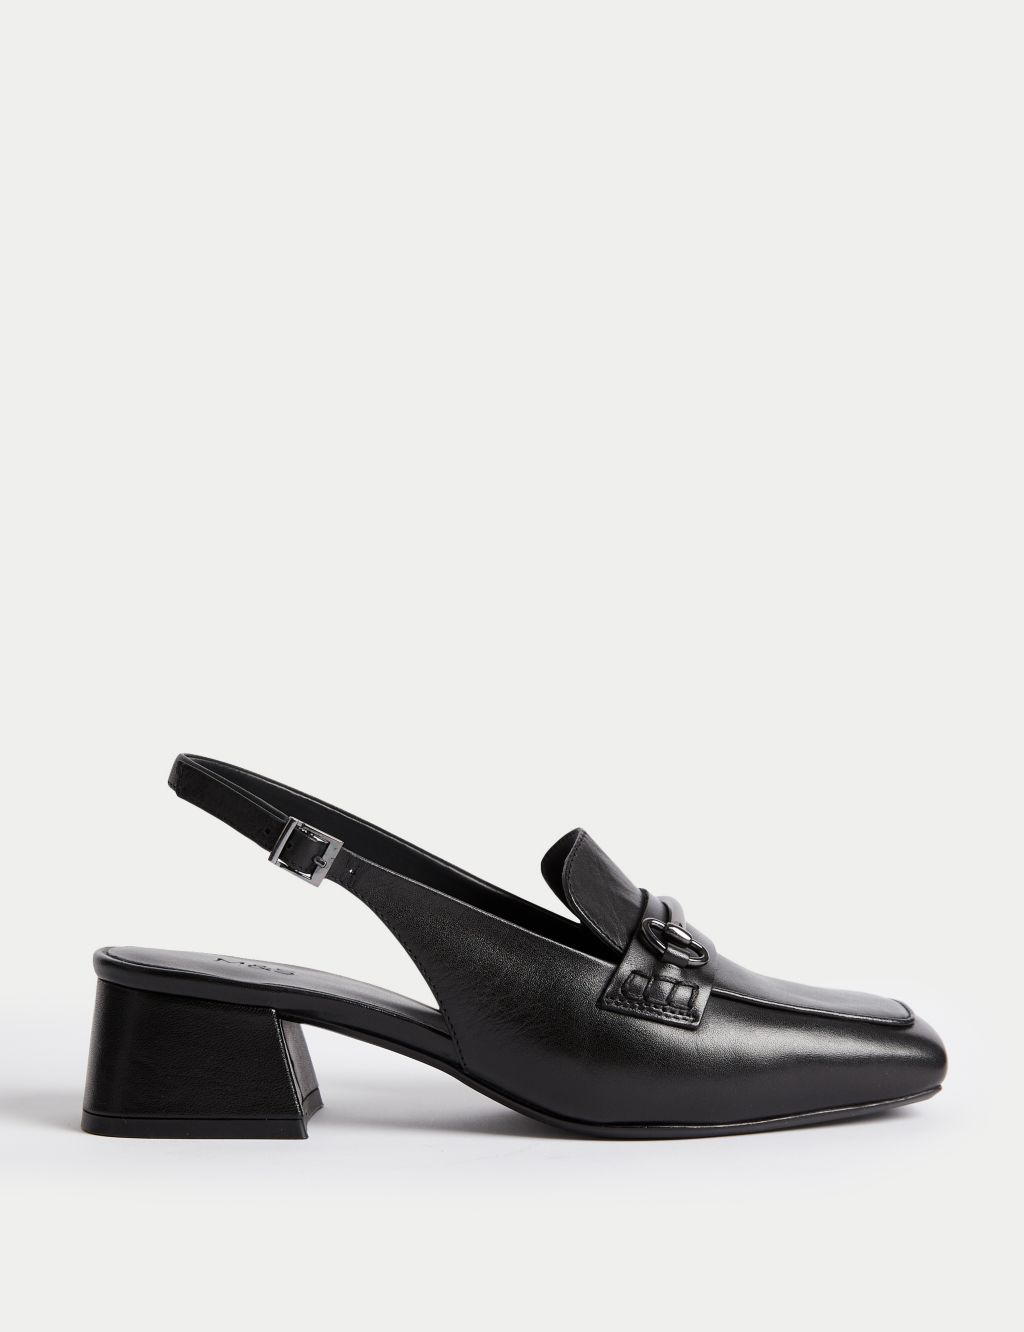 Patent Leather Block Heel Slingback Shoes